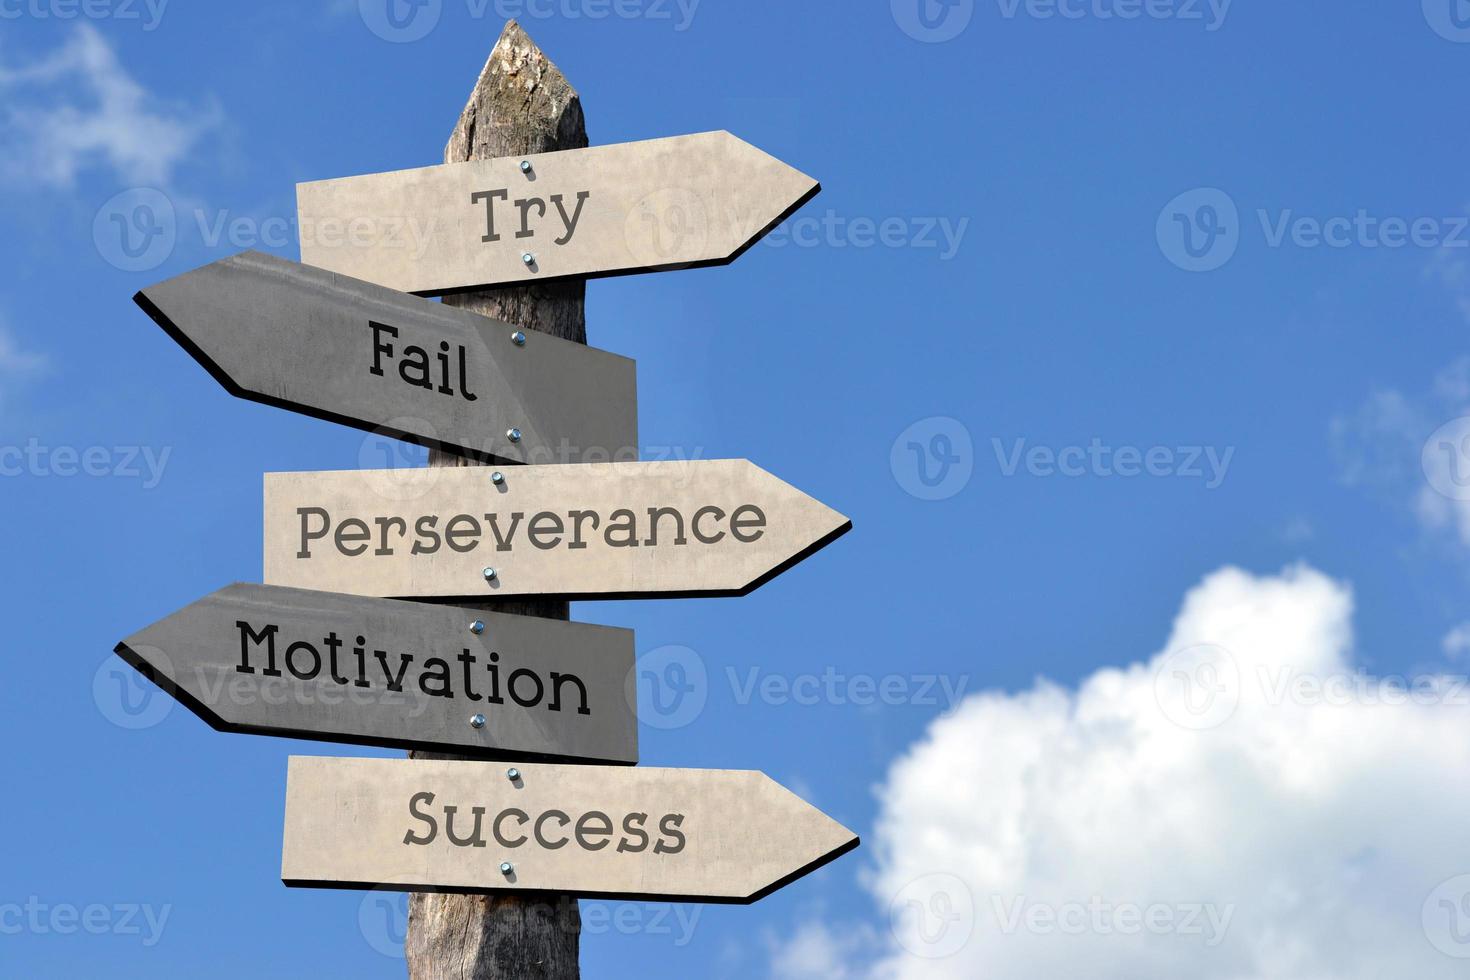 Try, Fail, Perseverance, Motivation, Success - Wooden Signpost with Five Arrows, Sky with Clouds photo